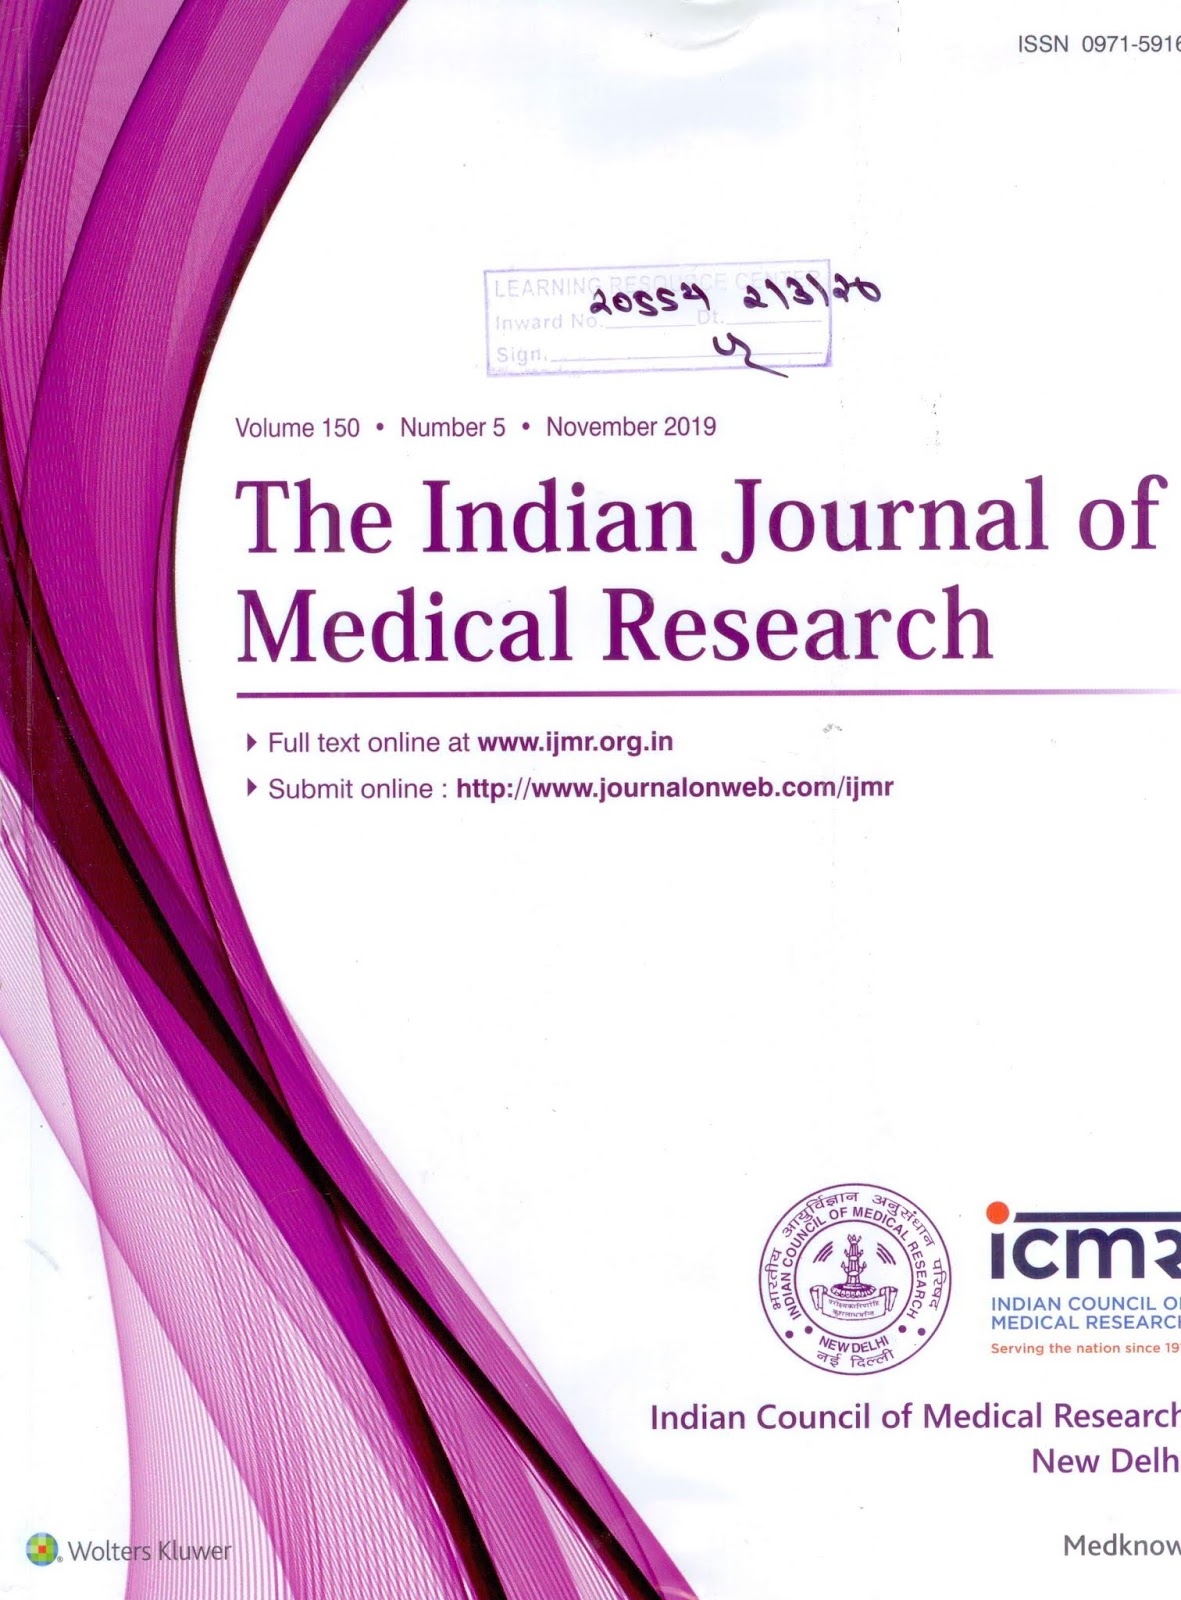 http://www.ijmr.org.in/showBackIssue.asp?issn=0971-5916;year=2019;volume=150;issue=5;month=November